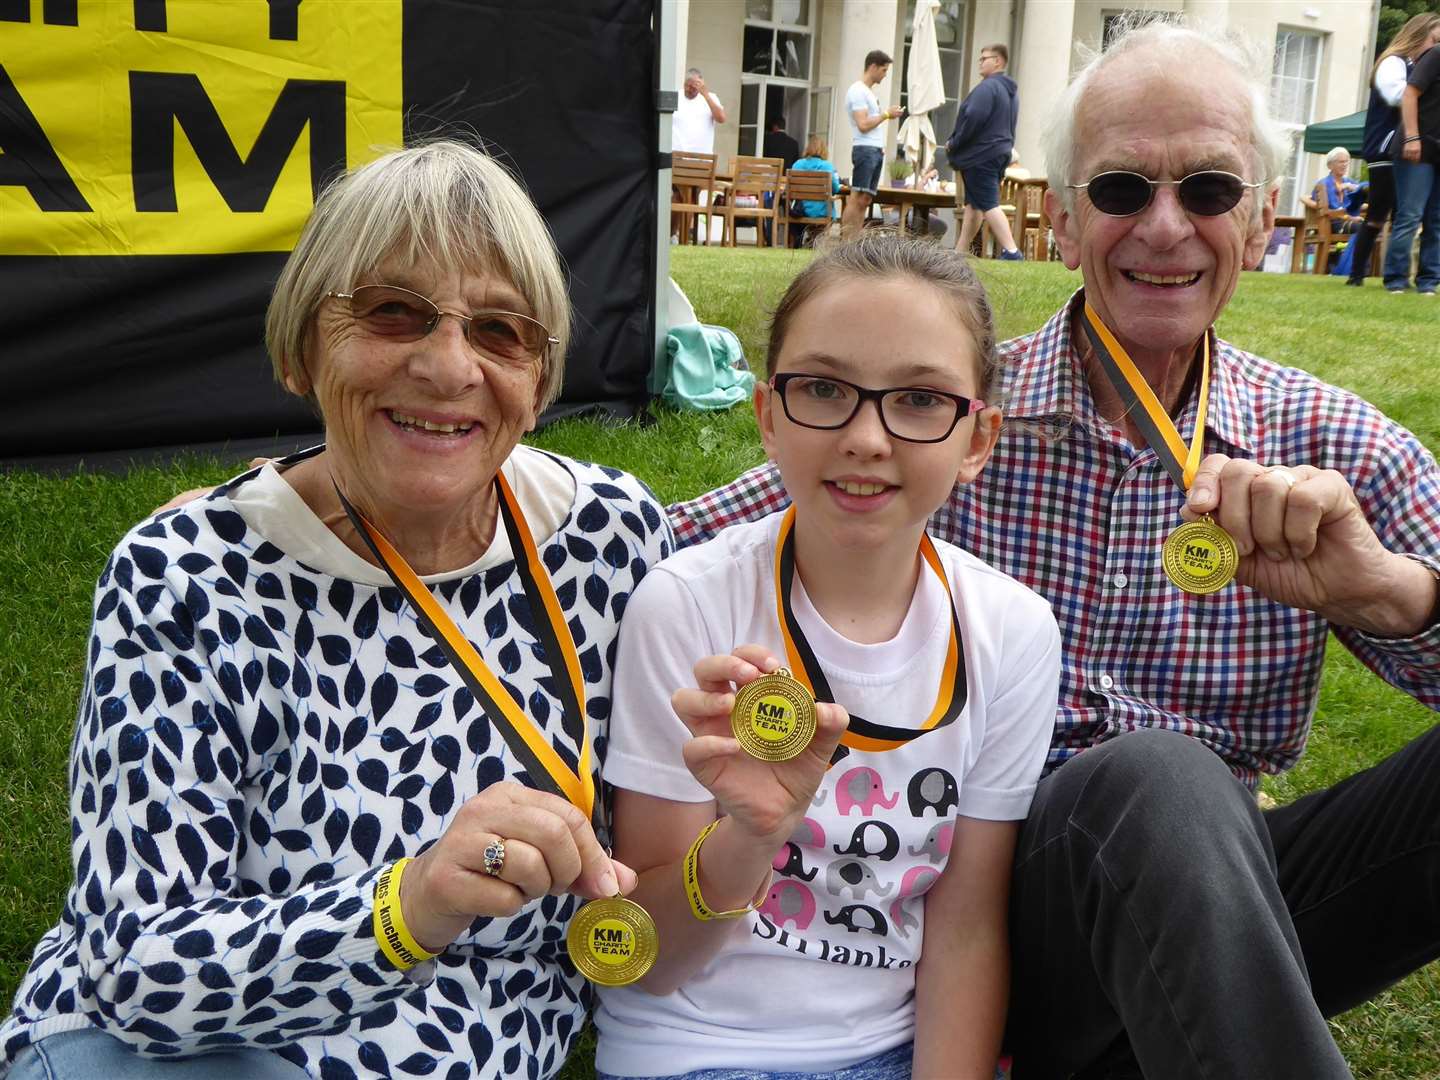 Collect a goody bag and a medal at the finish line of the KM Charity Walk.